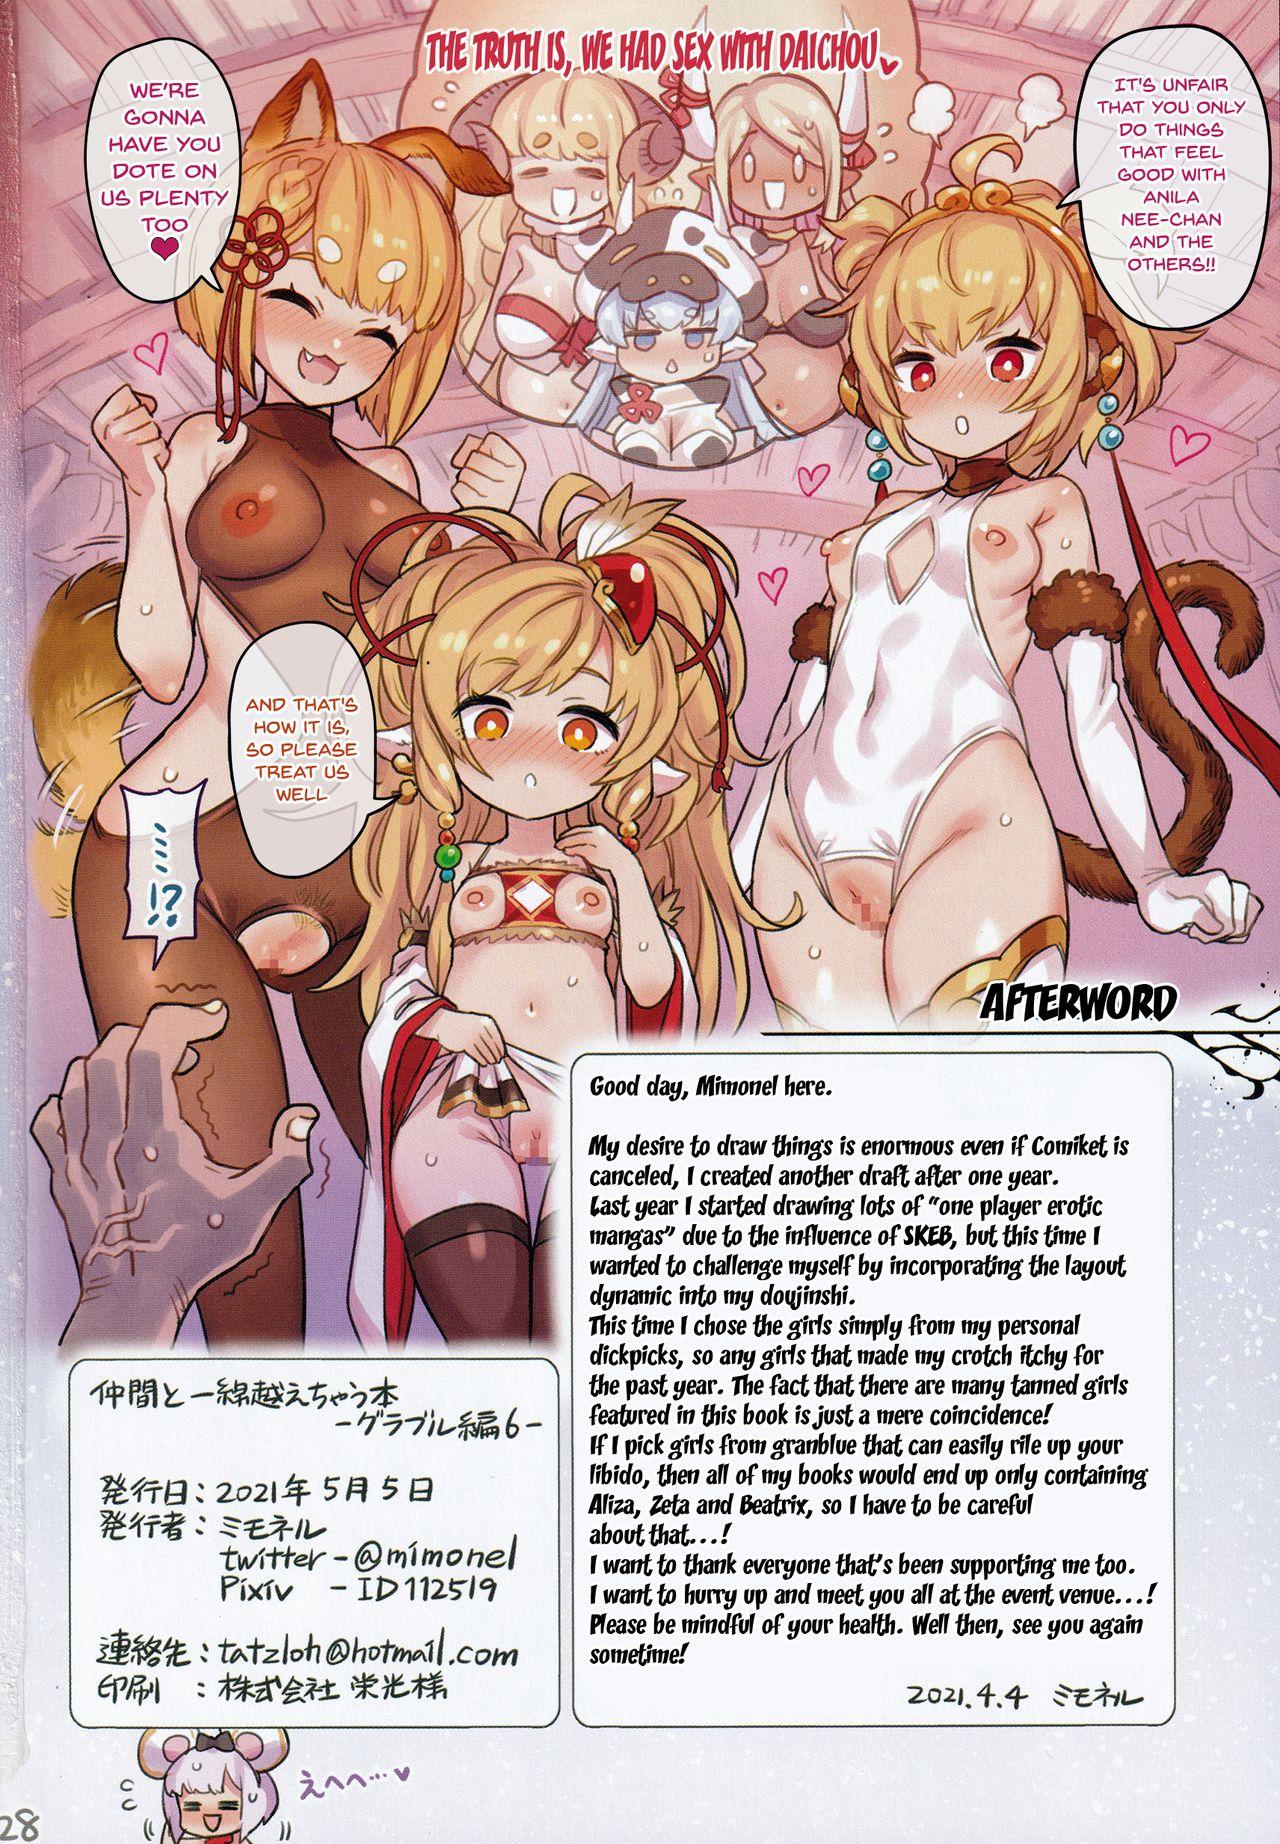 Pee (AC3) [Mimoneland (Mimonel)] Nakama to Issen Koechau Hon -Grablu Hen 6- | A Book About Crossing The Line With Your Friends ~GranBlue Book 6~ (Granblue Fantasy) [English] {Doujins.com} - Granblue fantasy Spying - Page 26